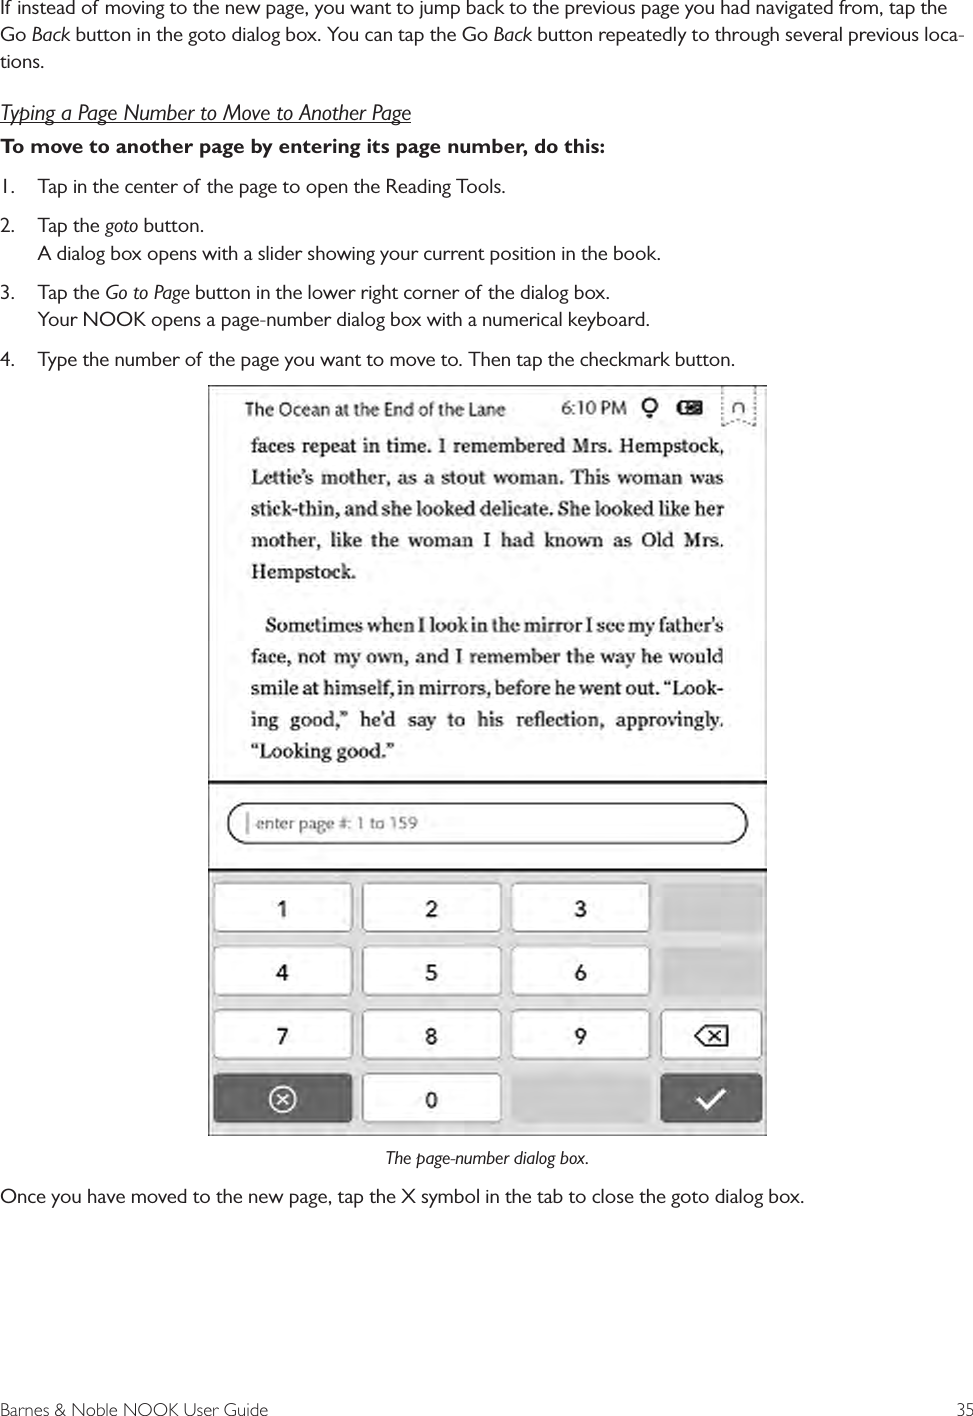 Barnes &amp; Noble NOOK User Guide  35If instead of moving to the new page, you want to jump back to the previous page you had navigated from, tap the Go Back button in the goto dialog box. You can tap the Go Back button repeatedly to through several previous loca-tions.Typing a Page Number to Move to Another PageTo move to another page by entering its page number, do this:1.  Tap in the center of the page to open the Reading Tools.2.  Tap the goto button. A dialog box opens with a slider showing your current position in the book.3.  Tap the Go to Page button in the lower right corner of the dialog box. Your NOOK opens a page-number dialog box with a numerical keyboard. 4.  Type the number of the page you want to move to. Then tap the checkmark button.The page-number dialog box.Once you have moved to the new page, tap the X symbol in the tab to close the goto dialog box.